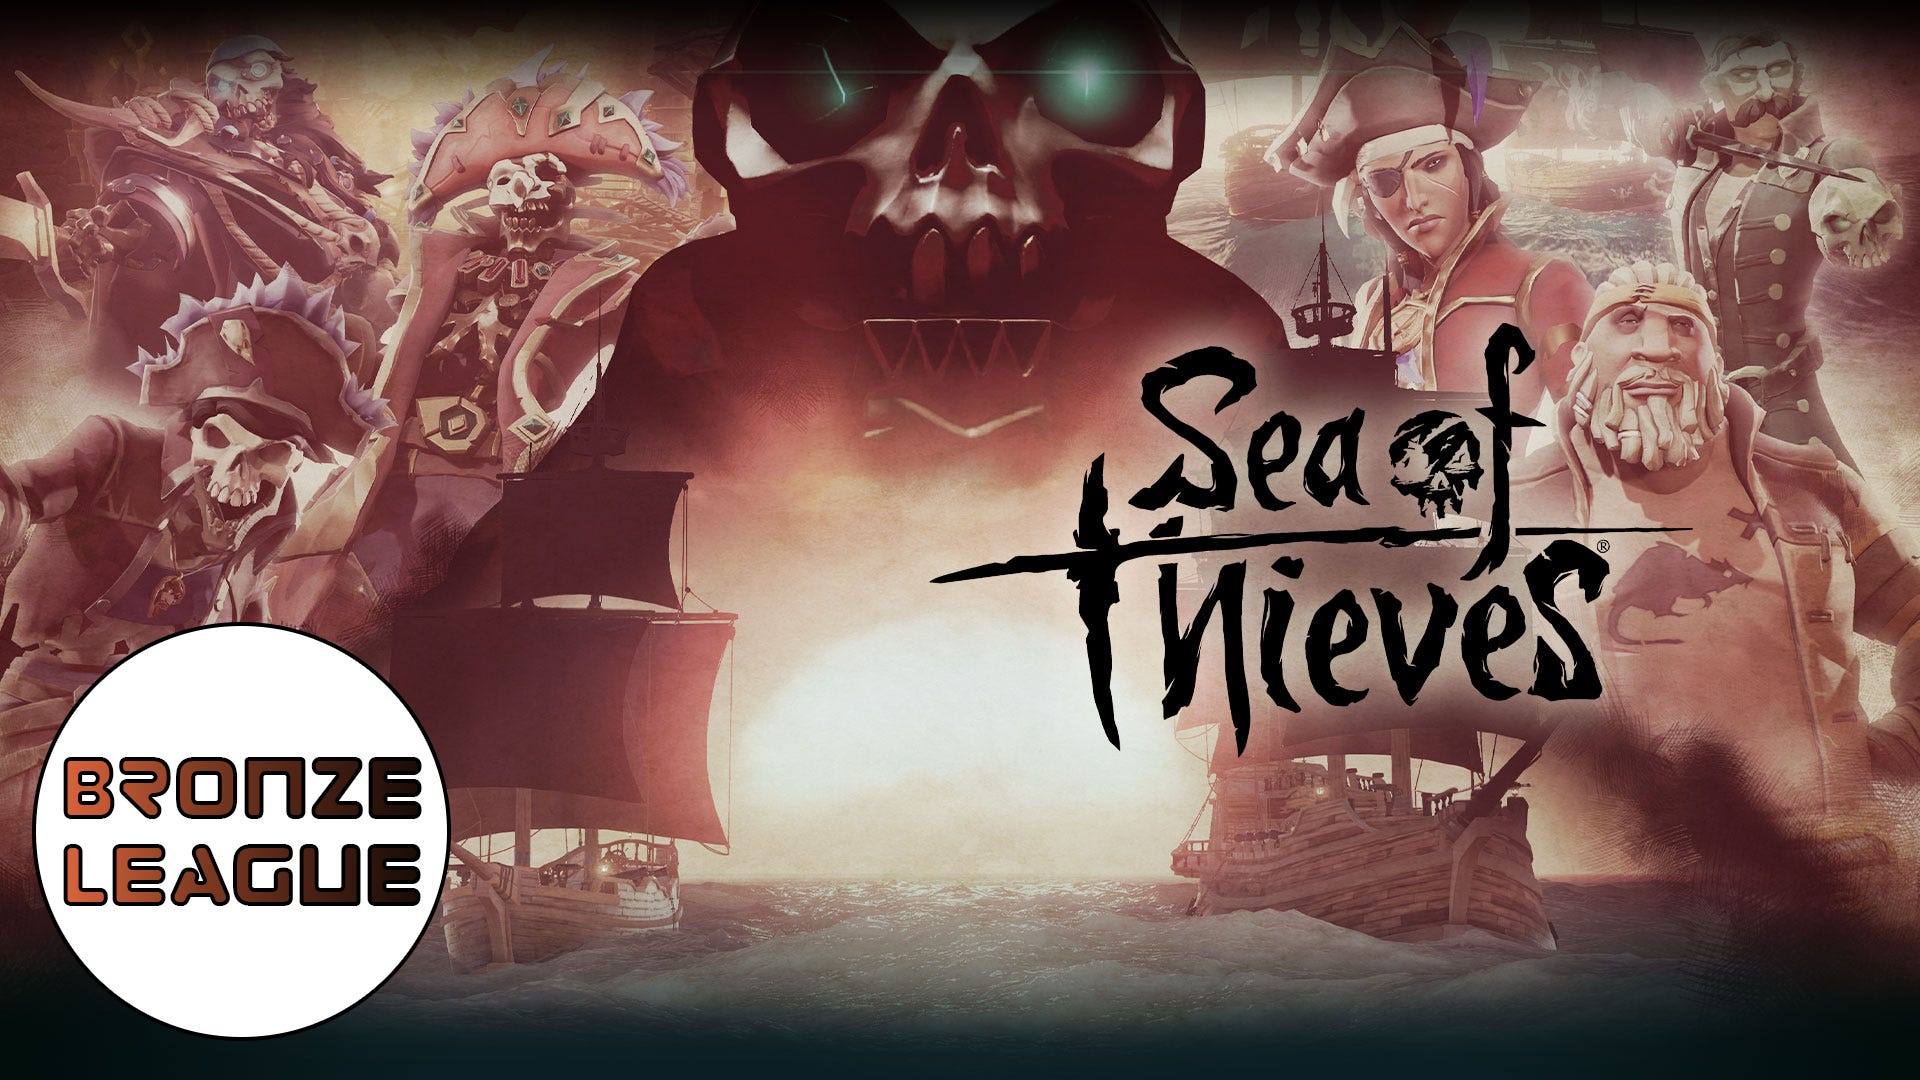 Is Sea of Thieves worth playing? Bronze League